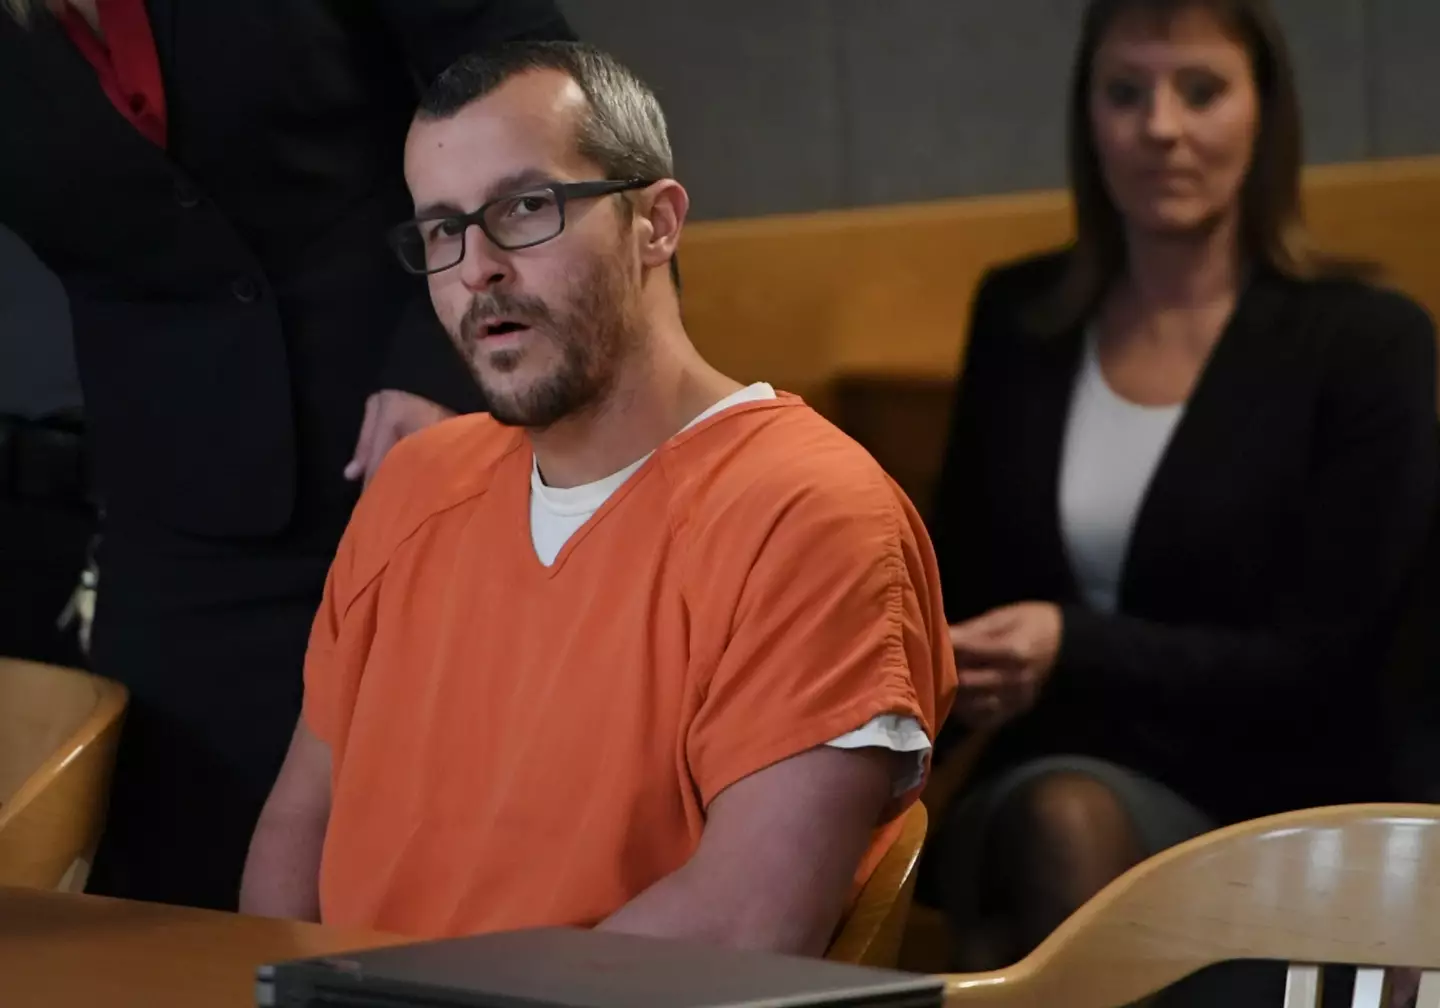 Chris Watts is serving time for the murders of his pregnant wife and children.